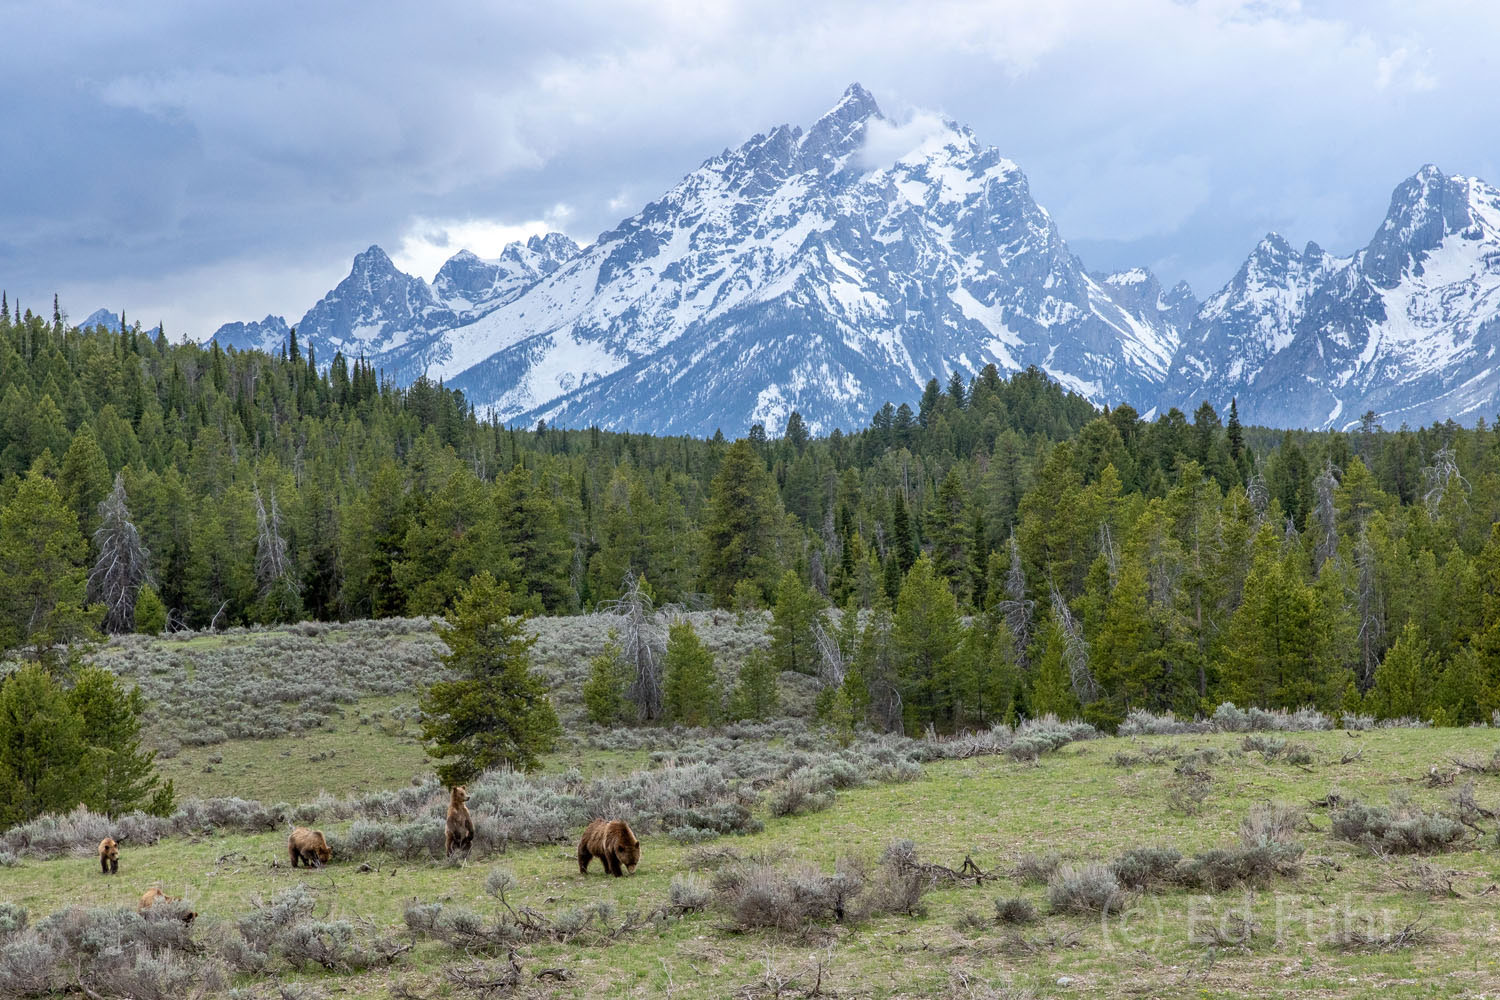 As 399 and her cubs graze in the cool below the Teton range, one of her cubs stands to get a better view of what lies beyond.